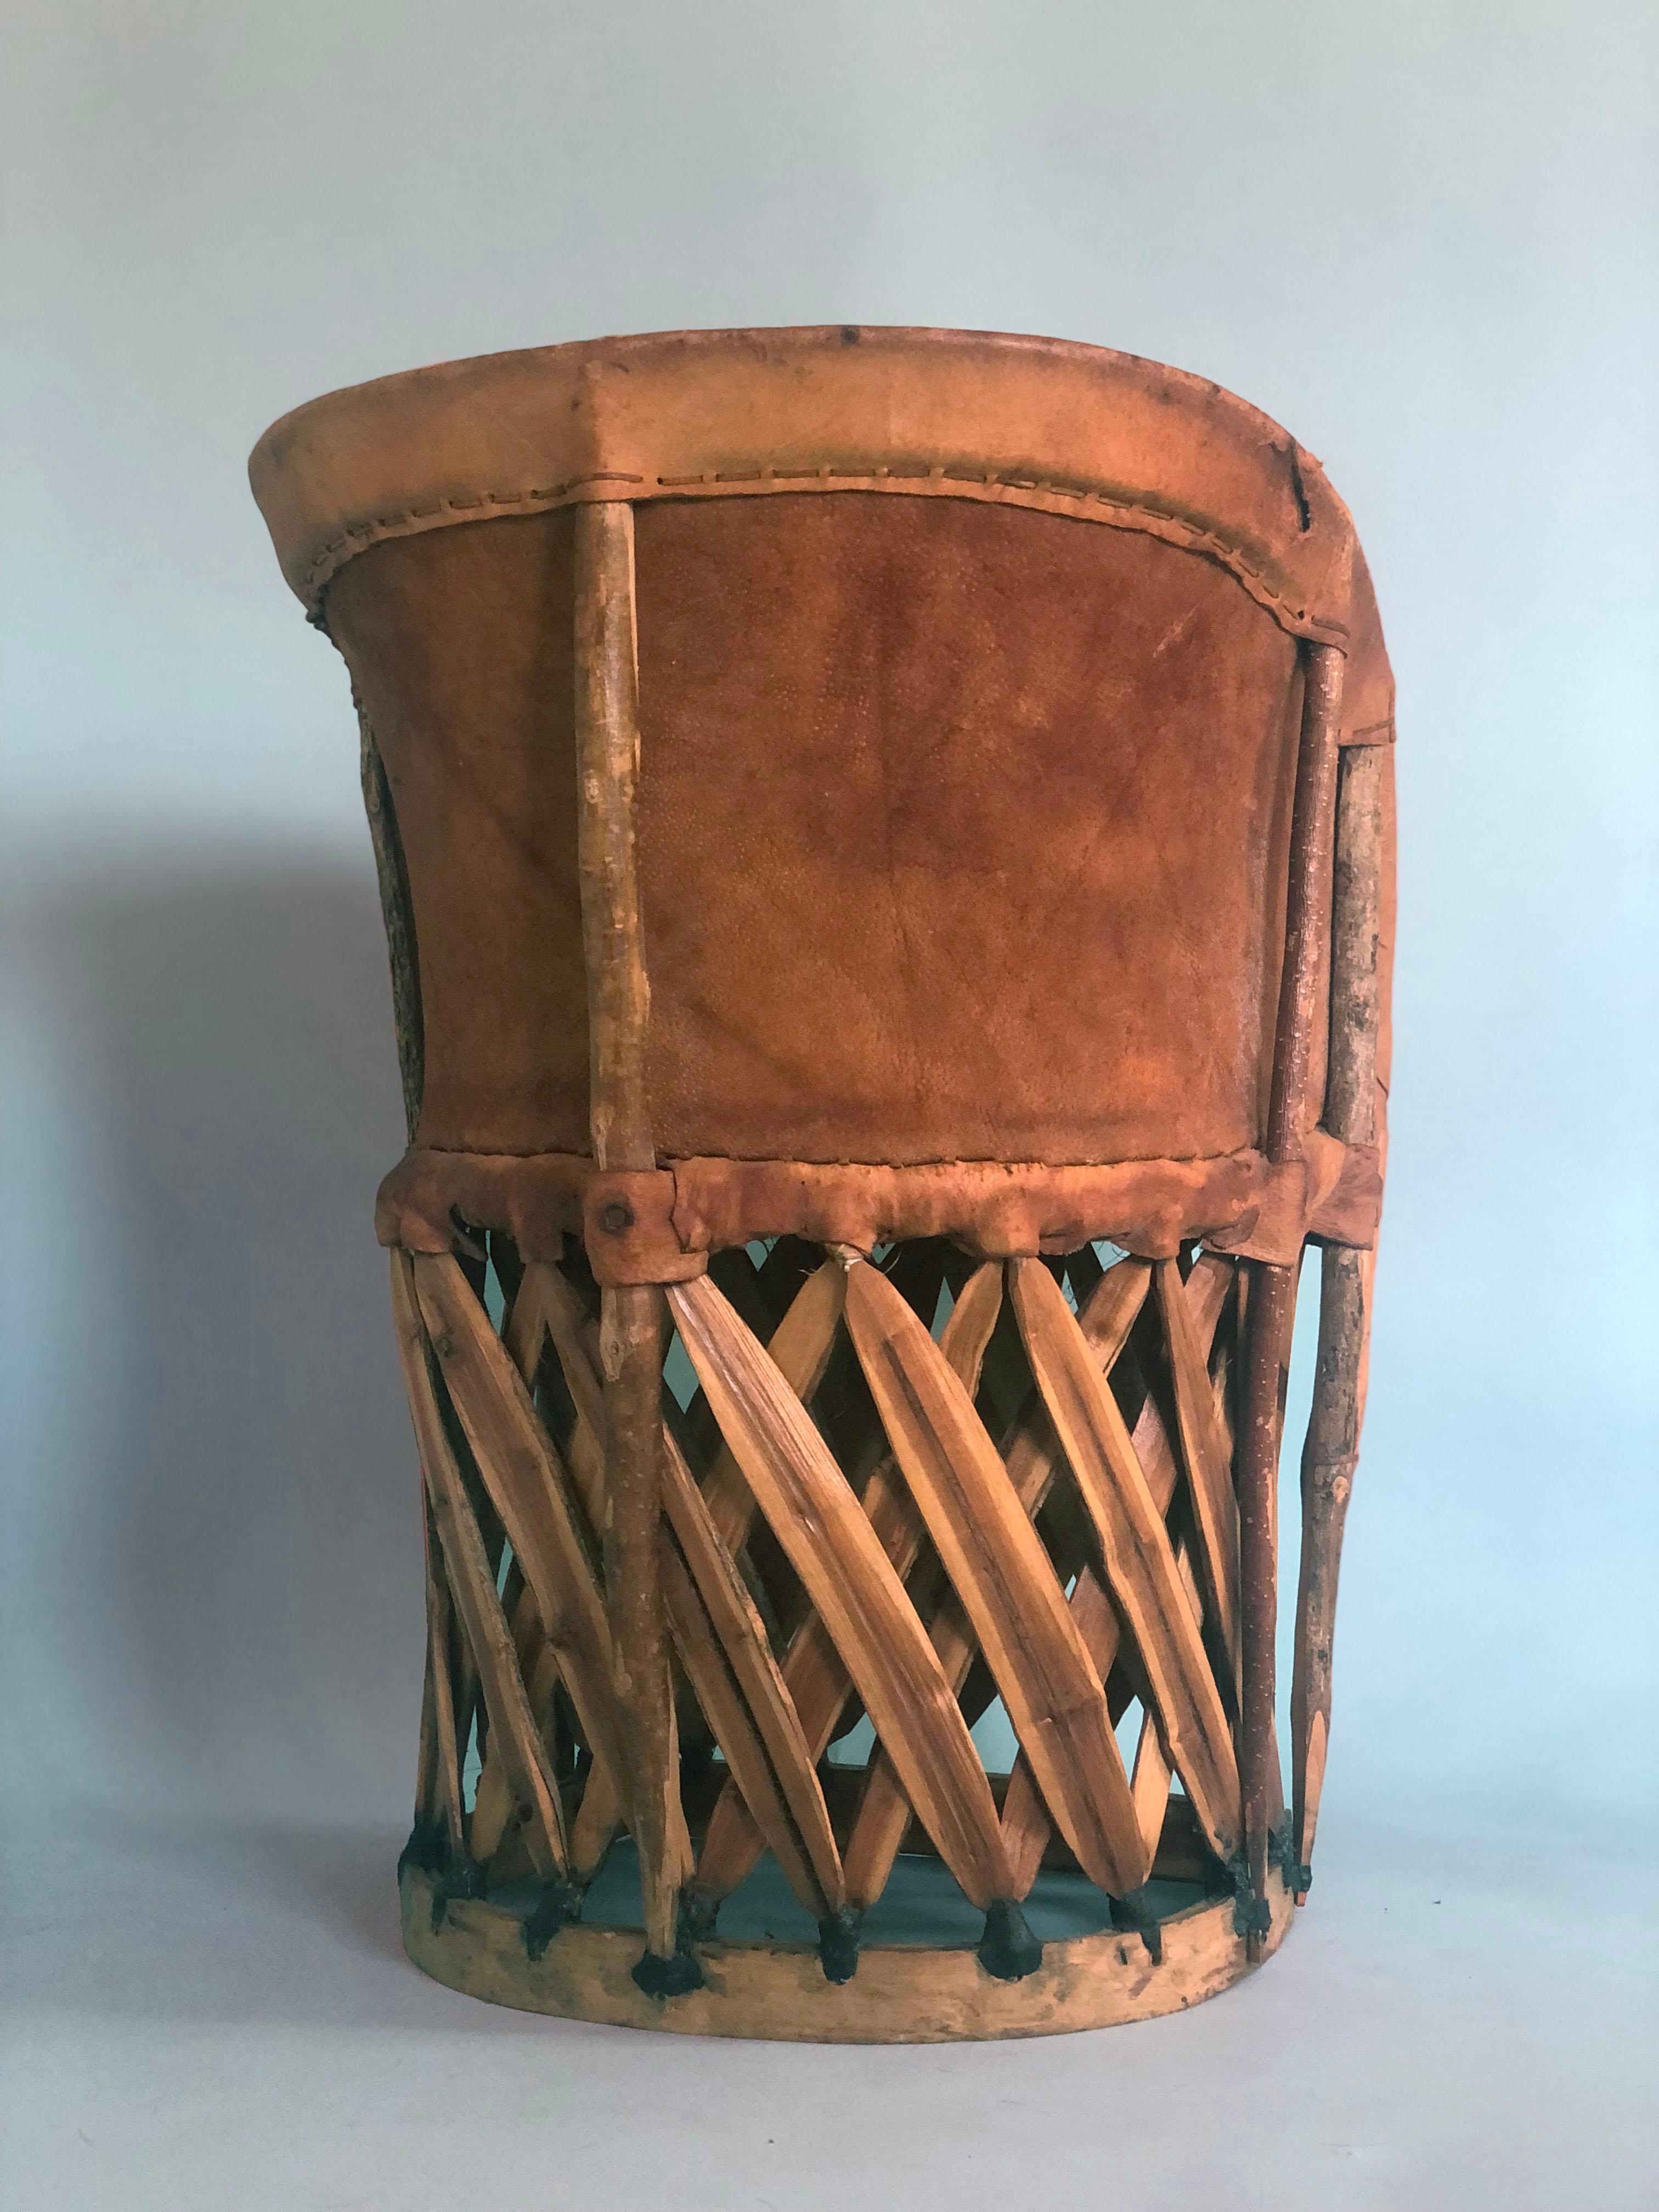 An unique Folk Art leather chair from Equipale Mexico, 1970s. Exotic woven wooden frame covered with ostrich leather. 
These chairs are still being made new. This is a vintage one.

Handmade chair In good condition. Mexico, 1970s

Object: